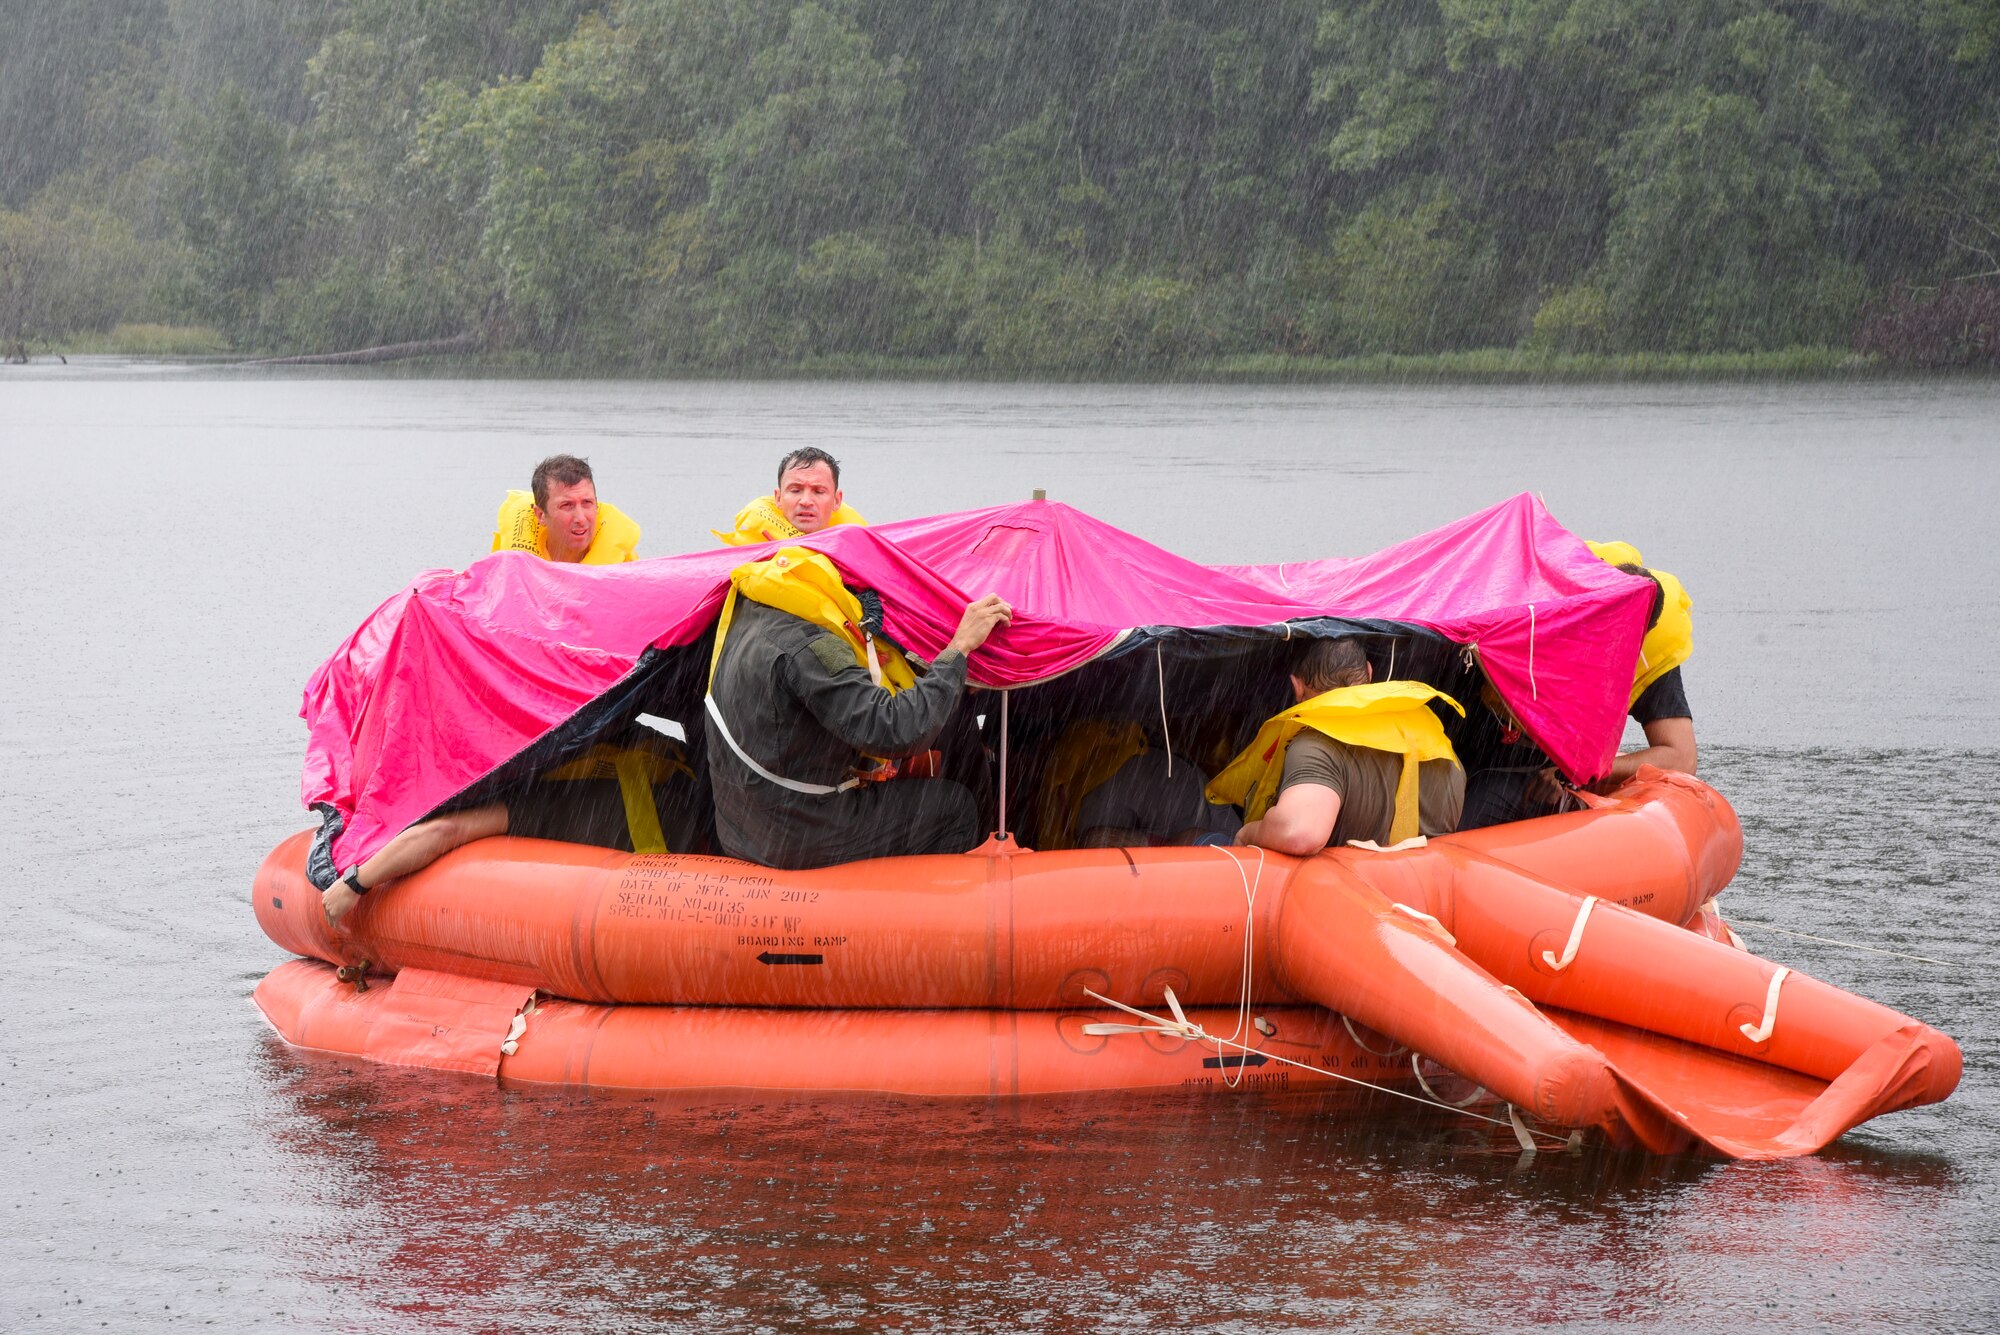 Airmen put a tarp over a raft during water survival training.